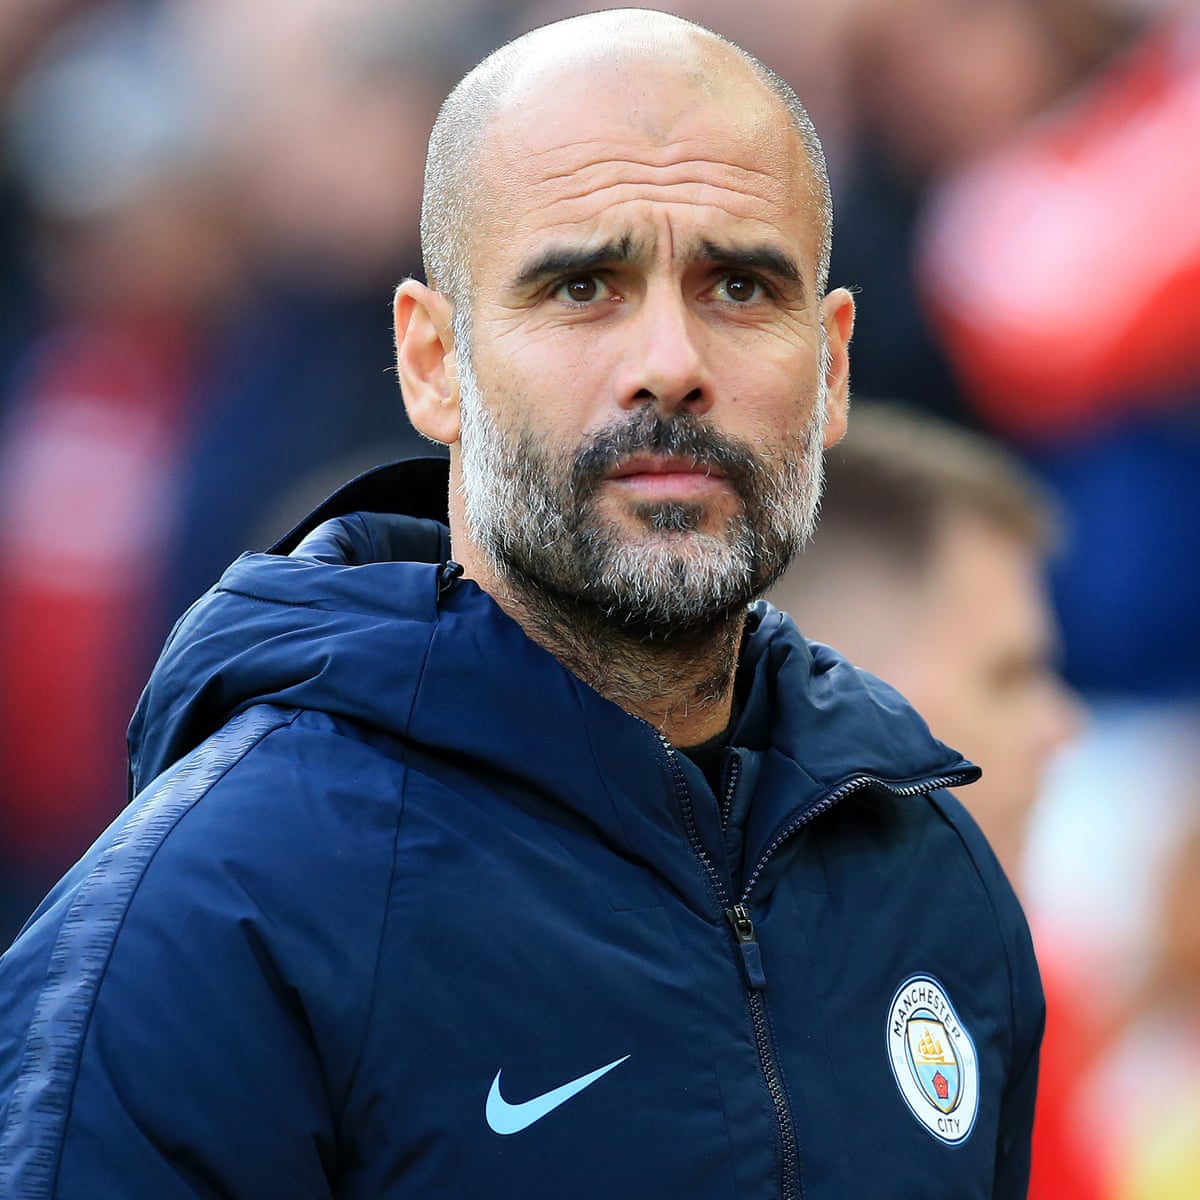 Pep Guardiola Set to Leave Manchester City in 2023